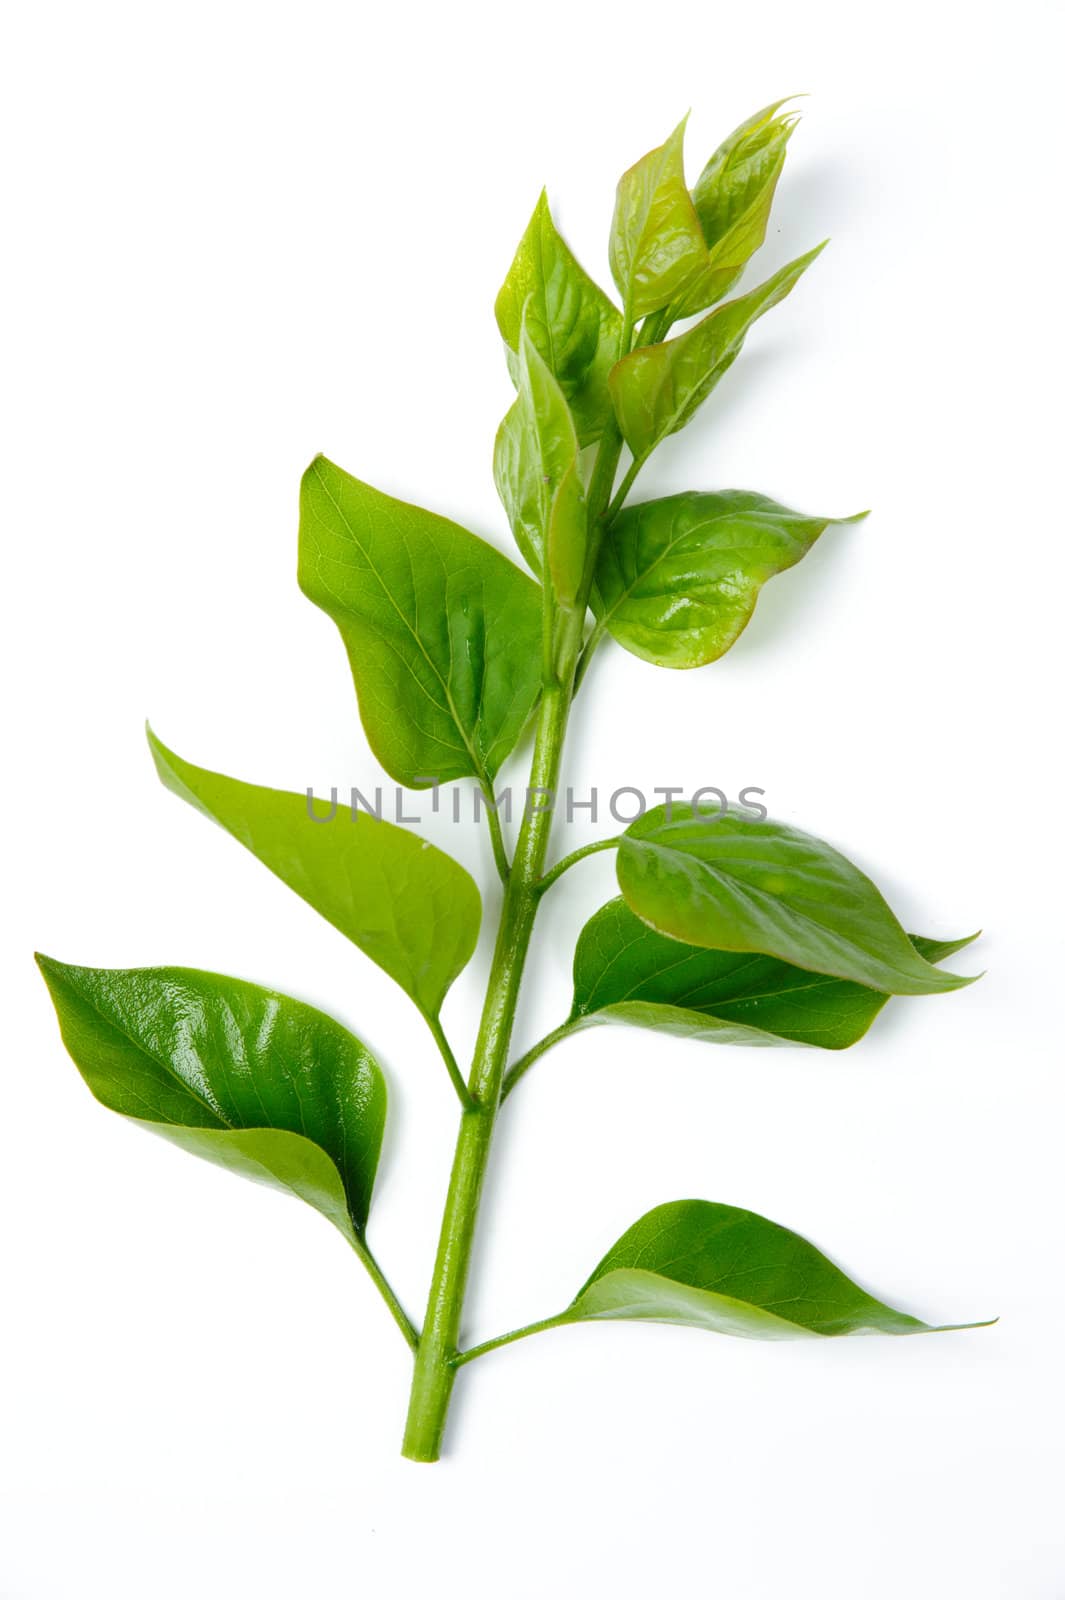 An image of a little branch of green plant